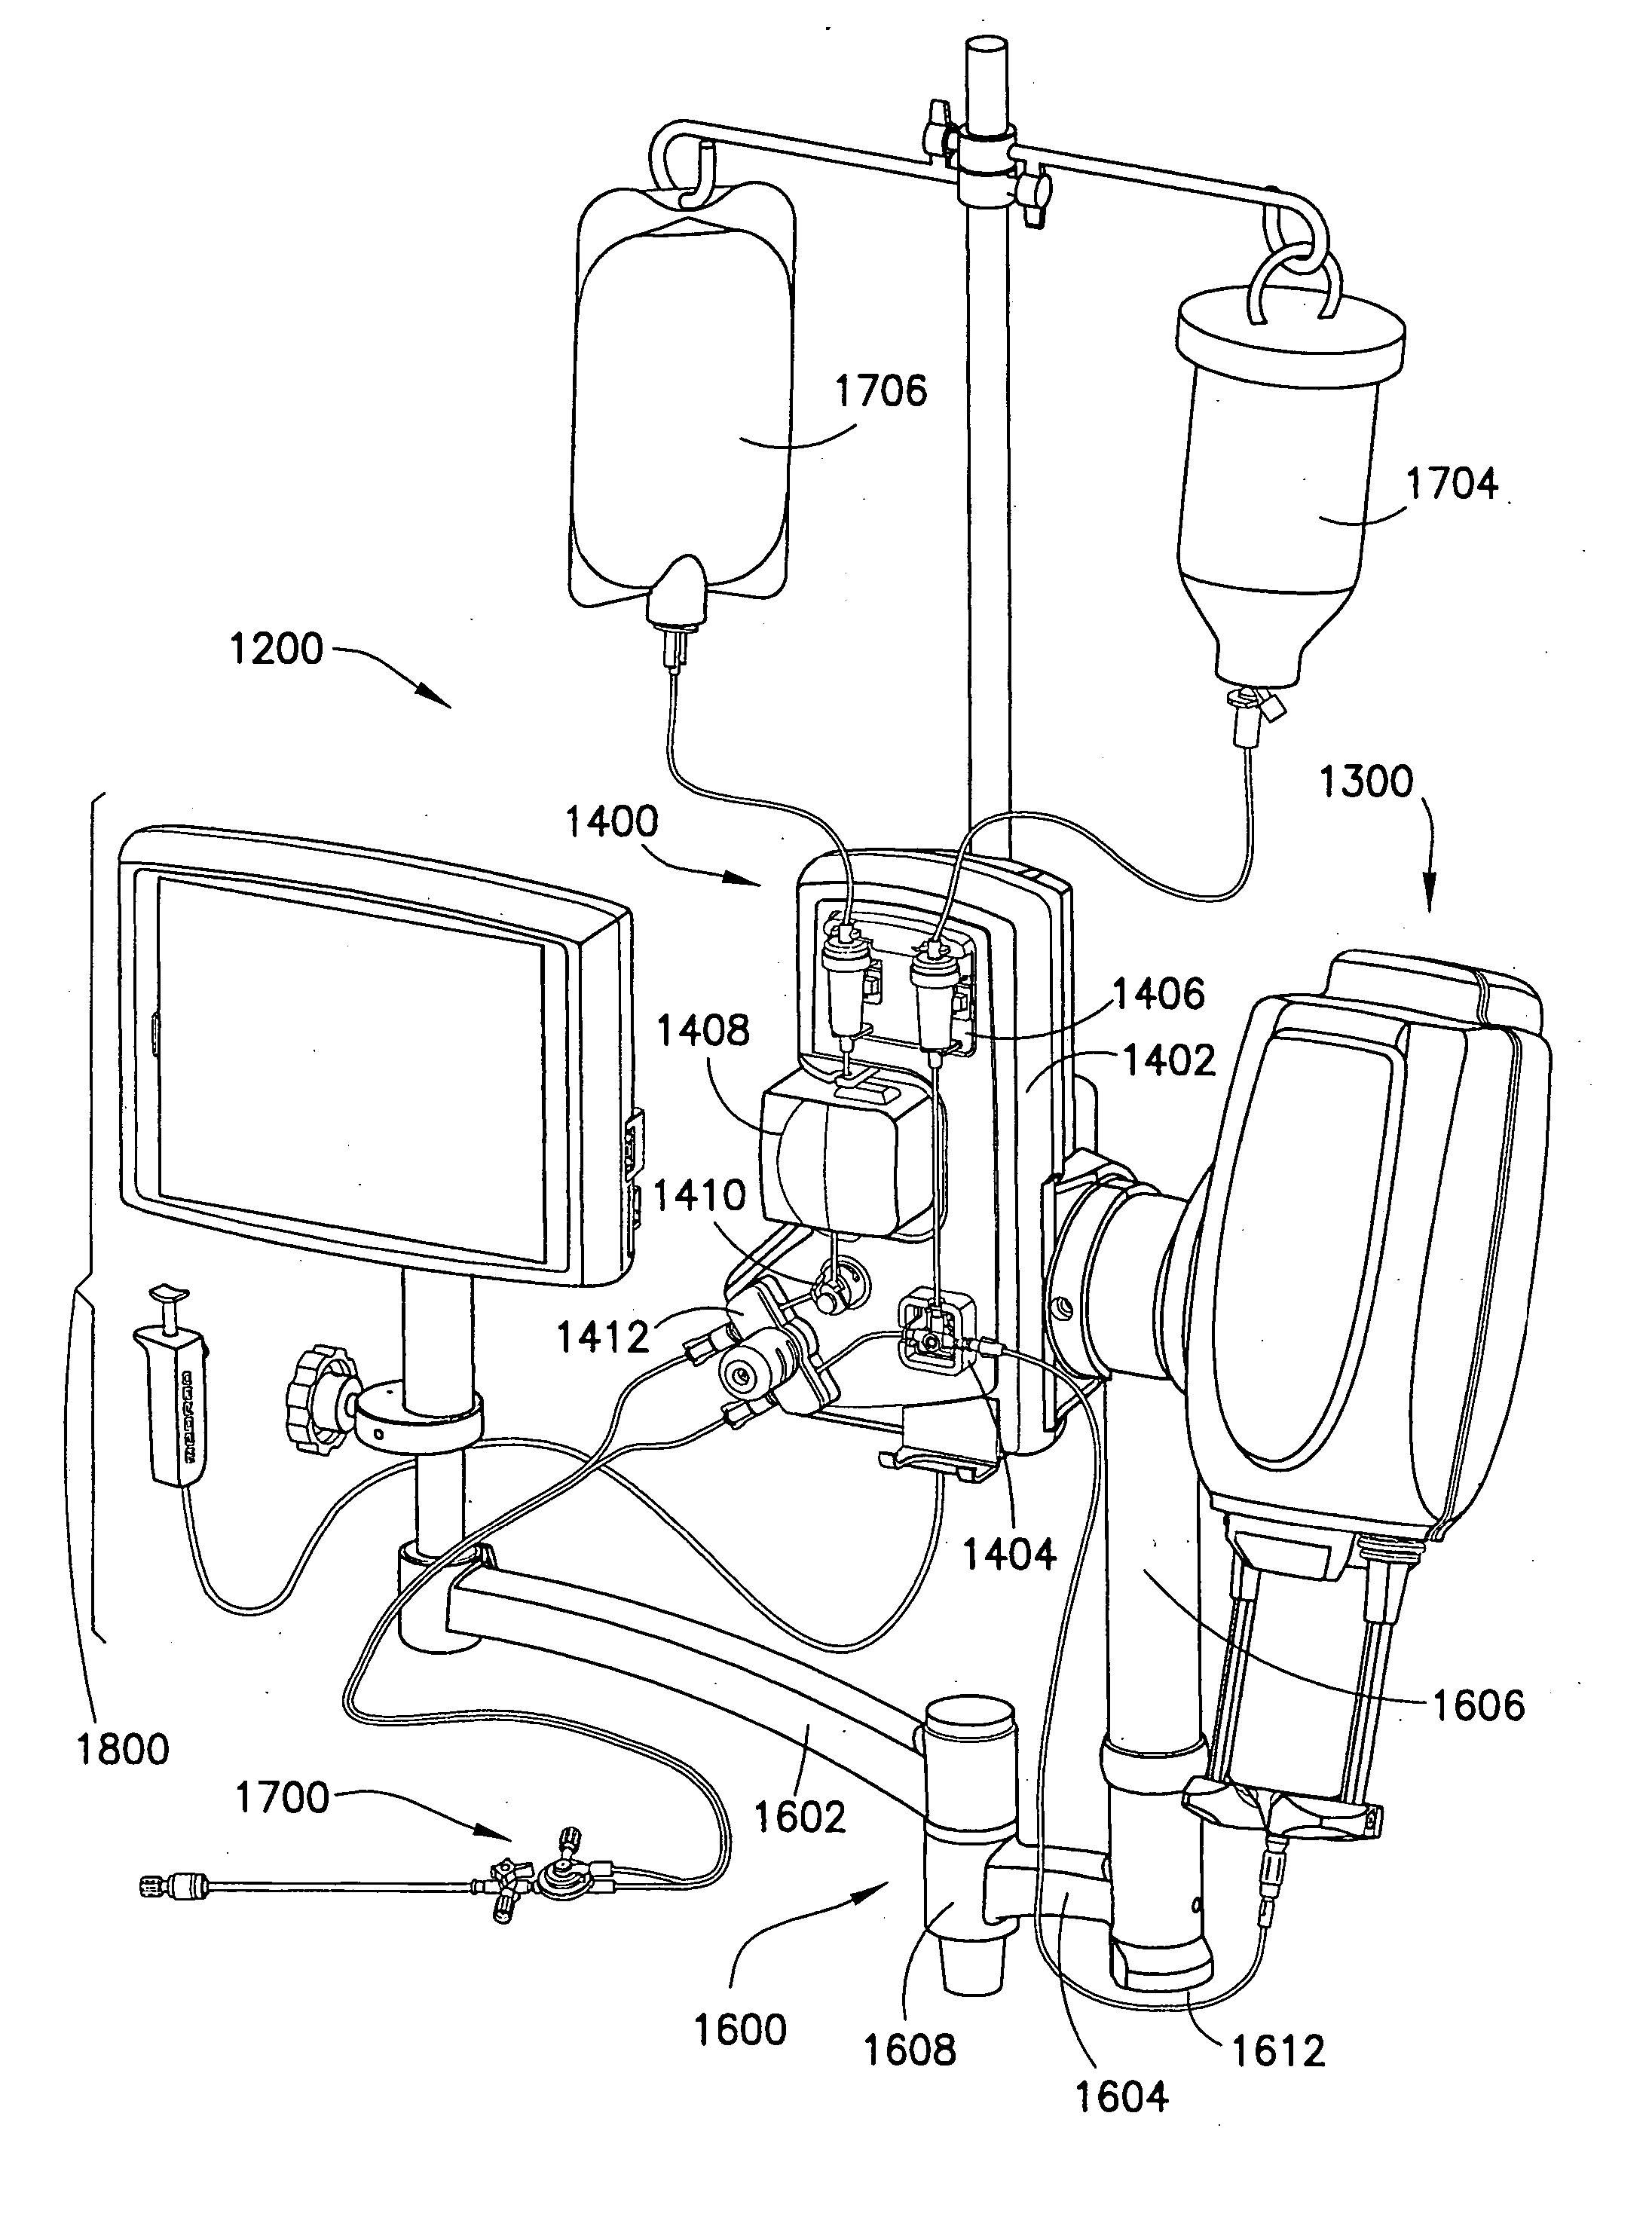 Mobile fluid delivery system with detachable pedestal